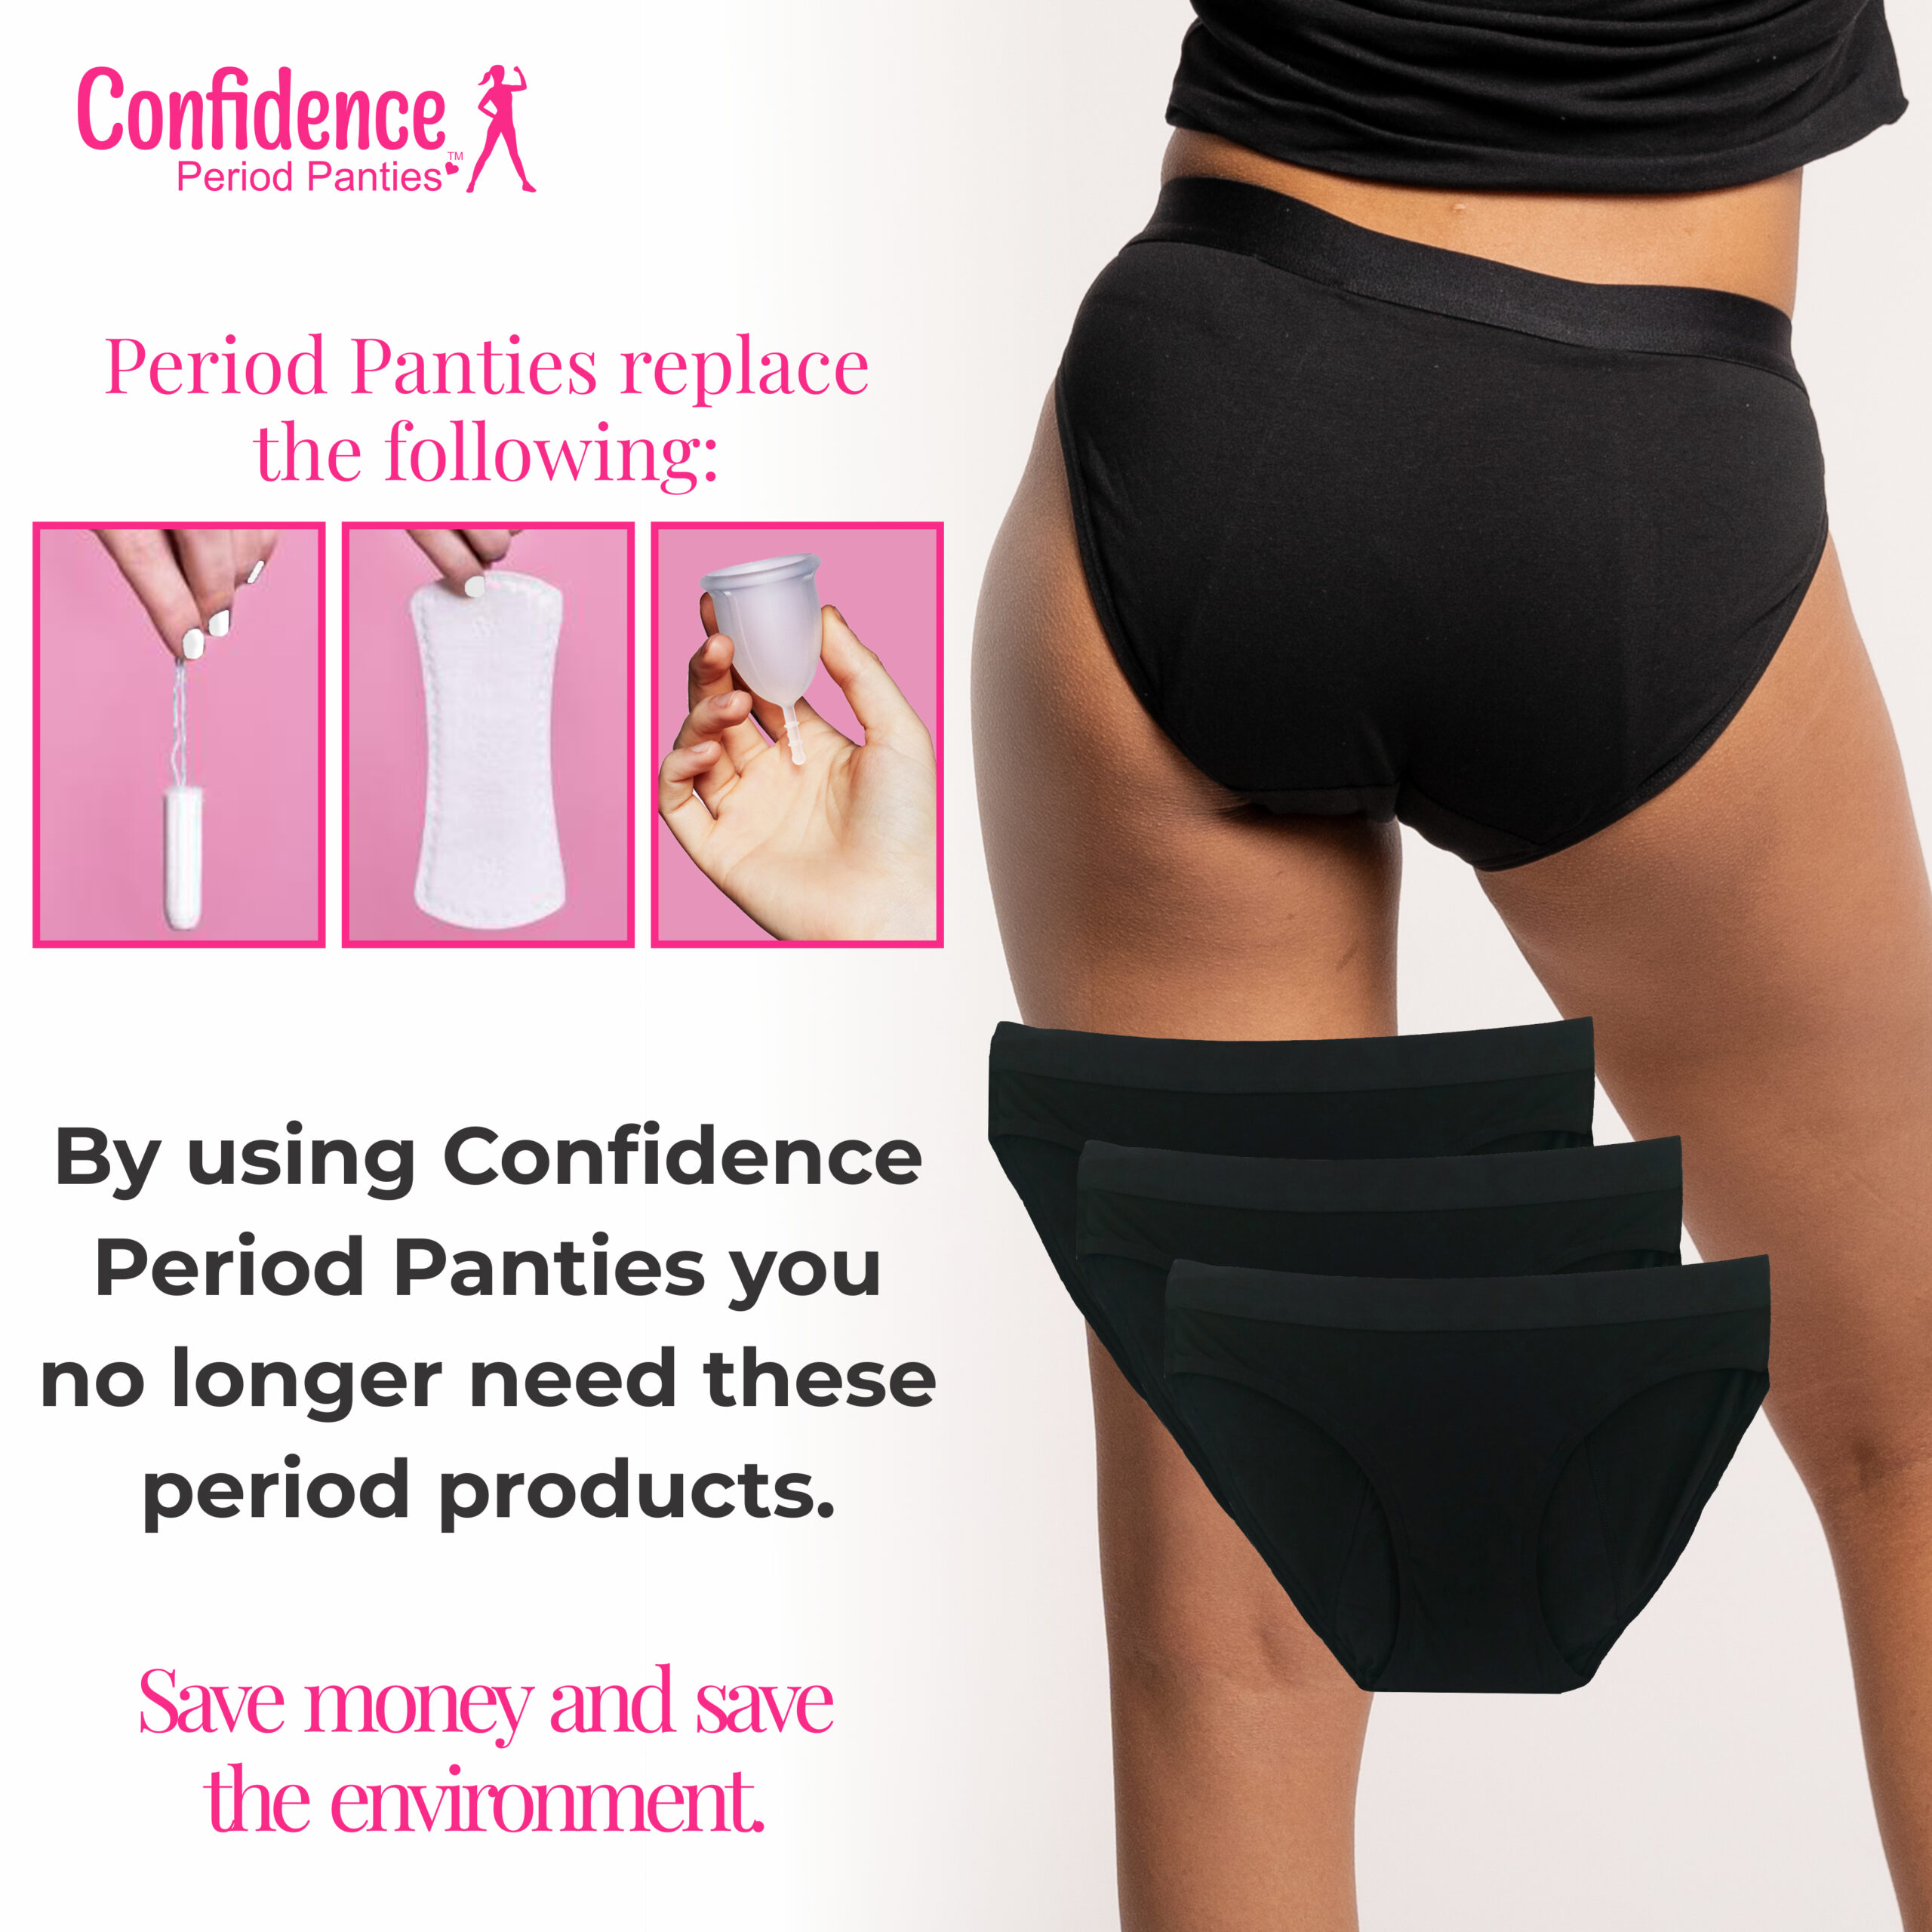 Frequently Asked Questions - Confidence Period Panties